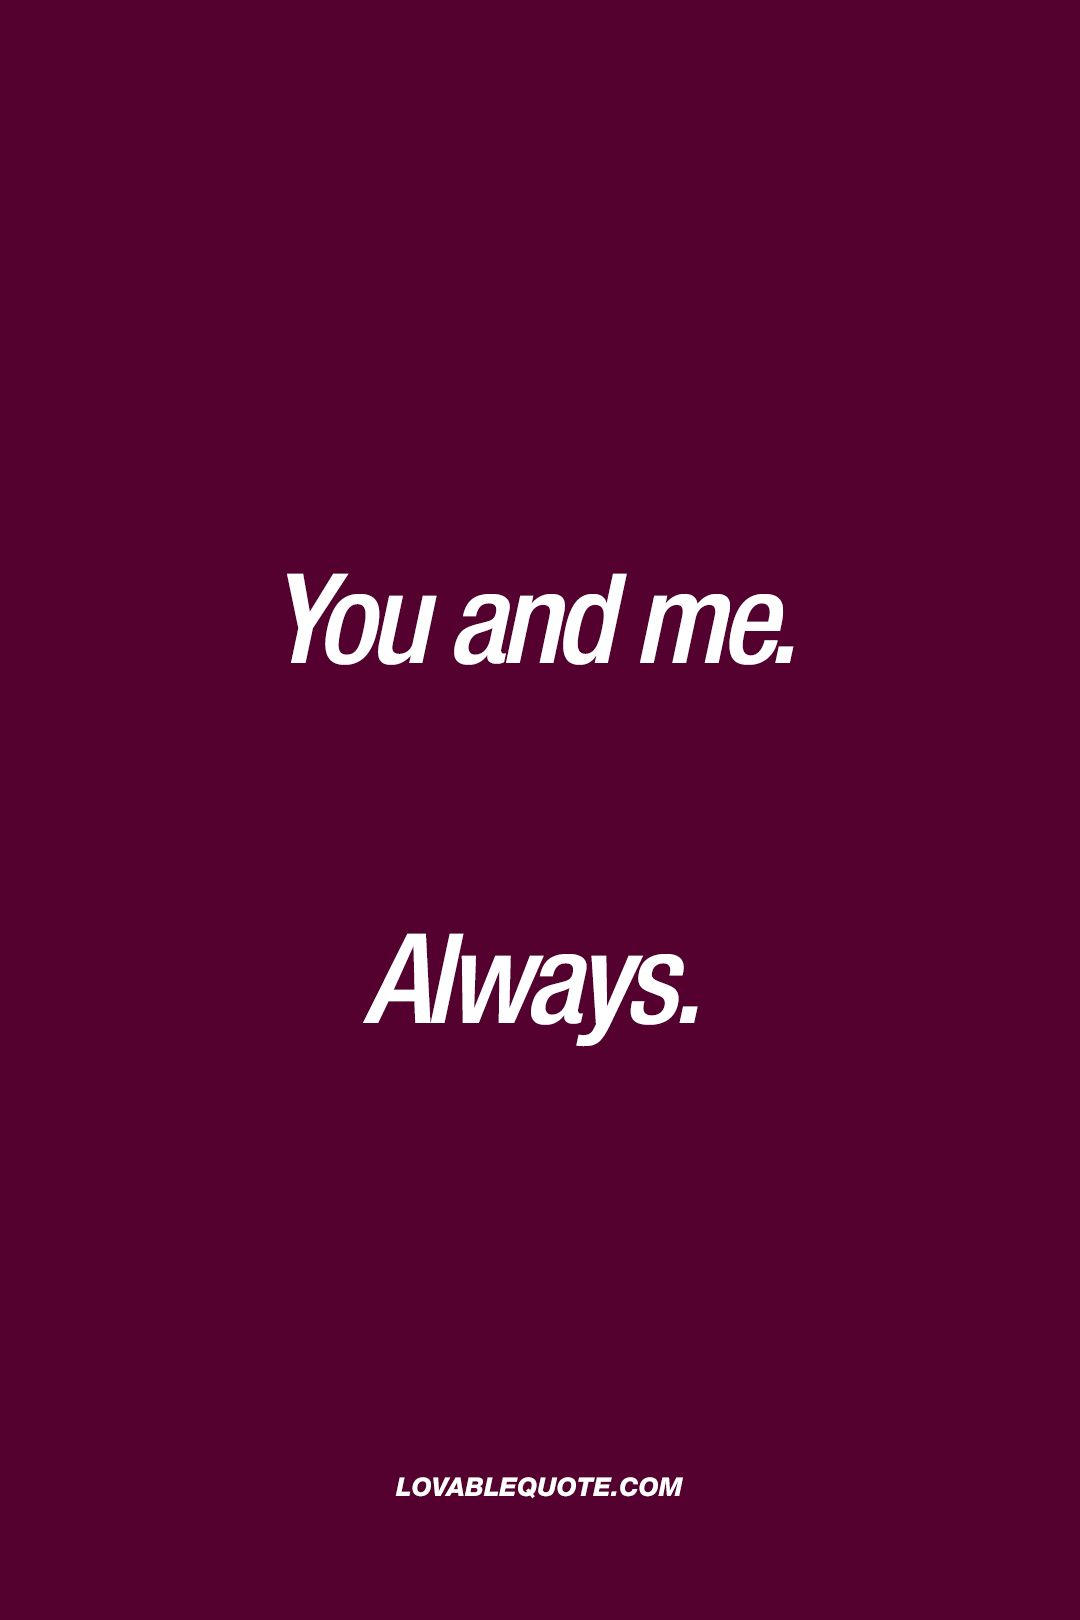 You And Me Quotes Love - KibrisPDR